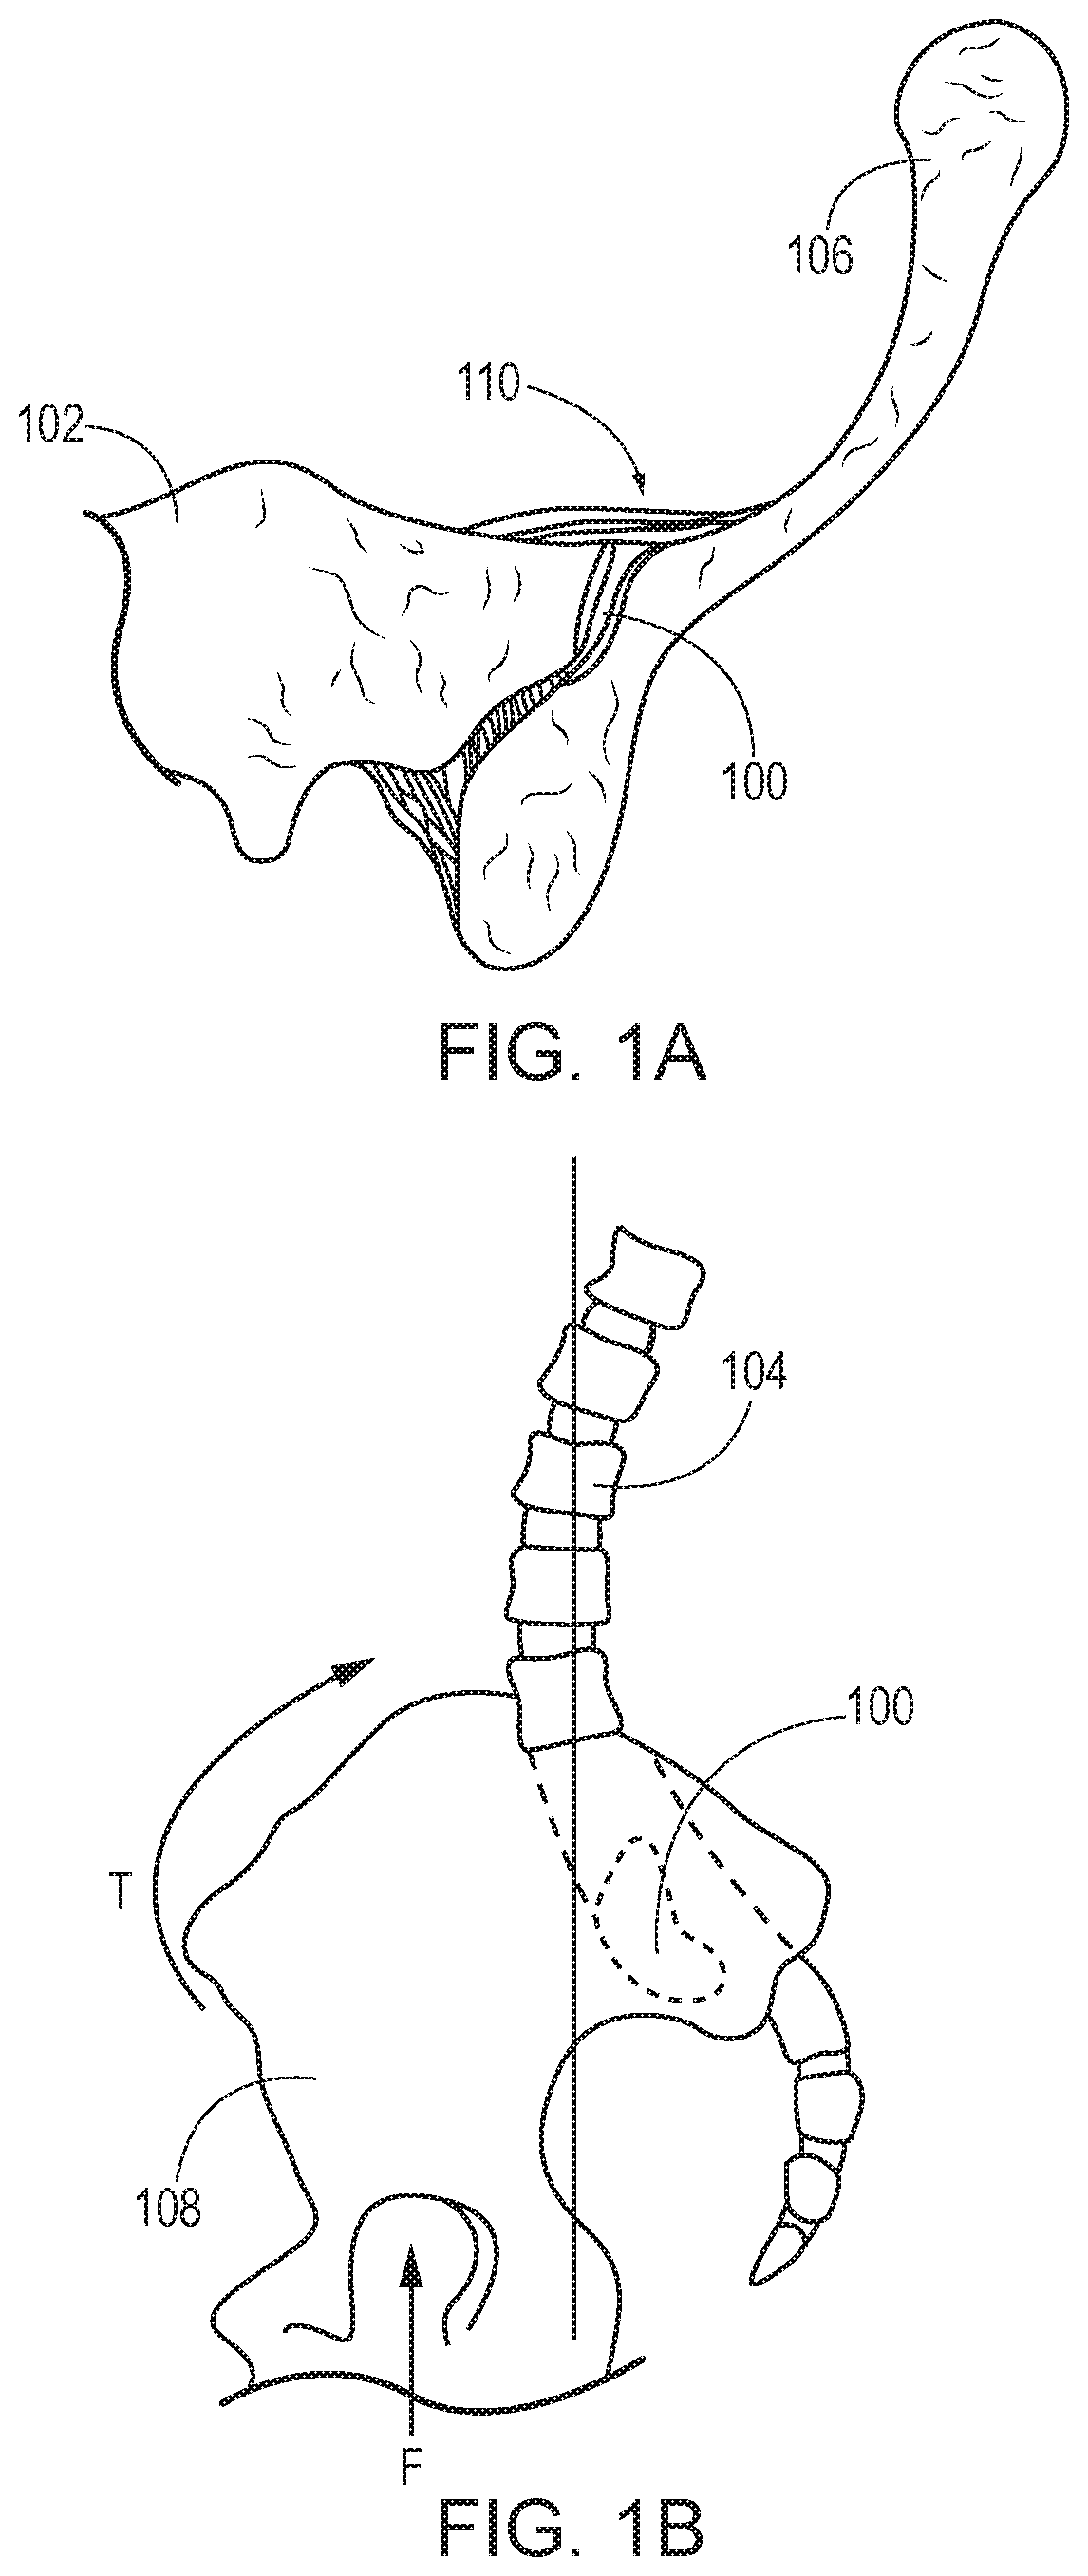 Sacroiliac joint fusion implants and methods